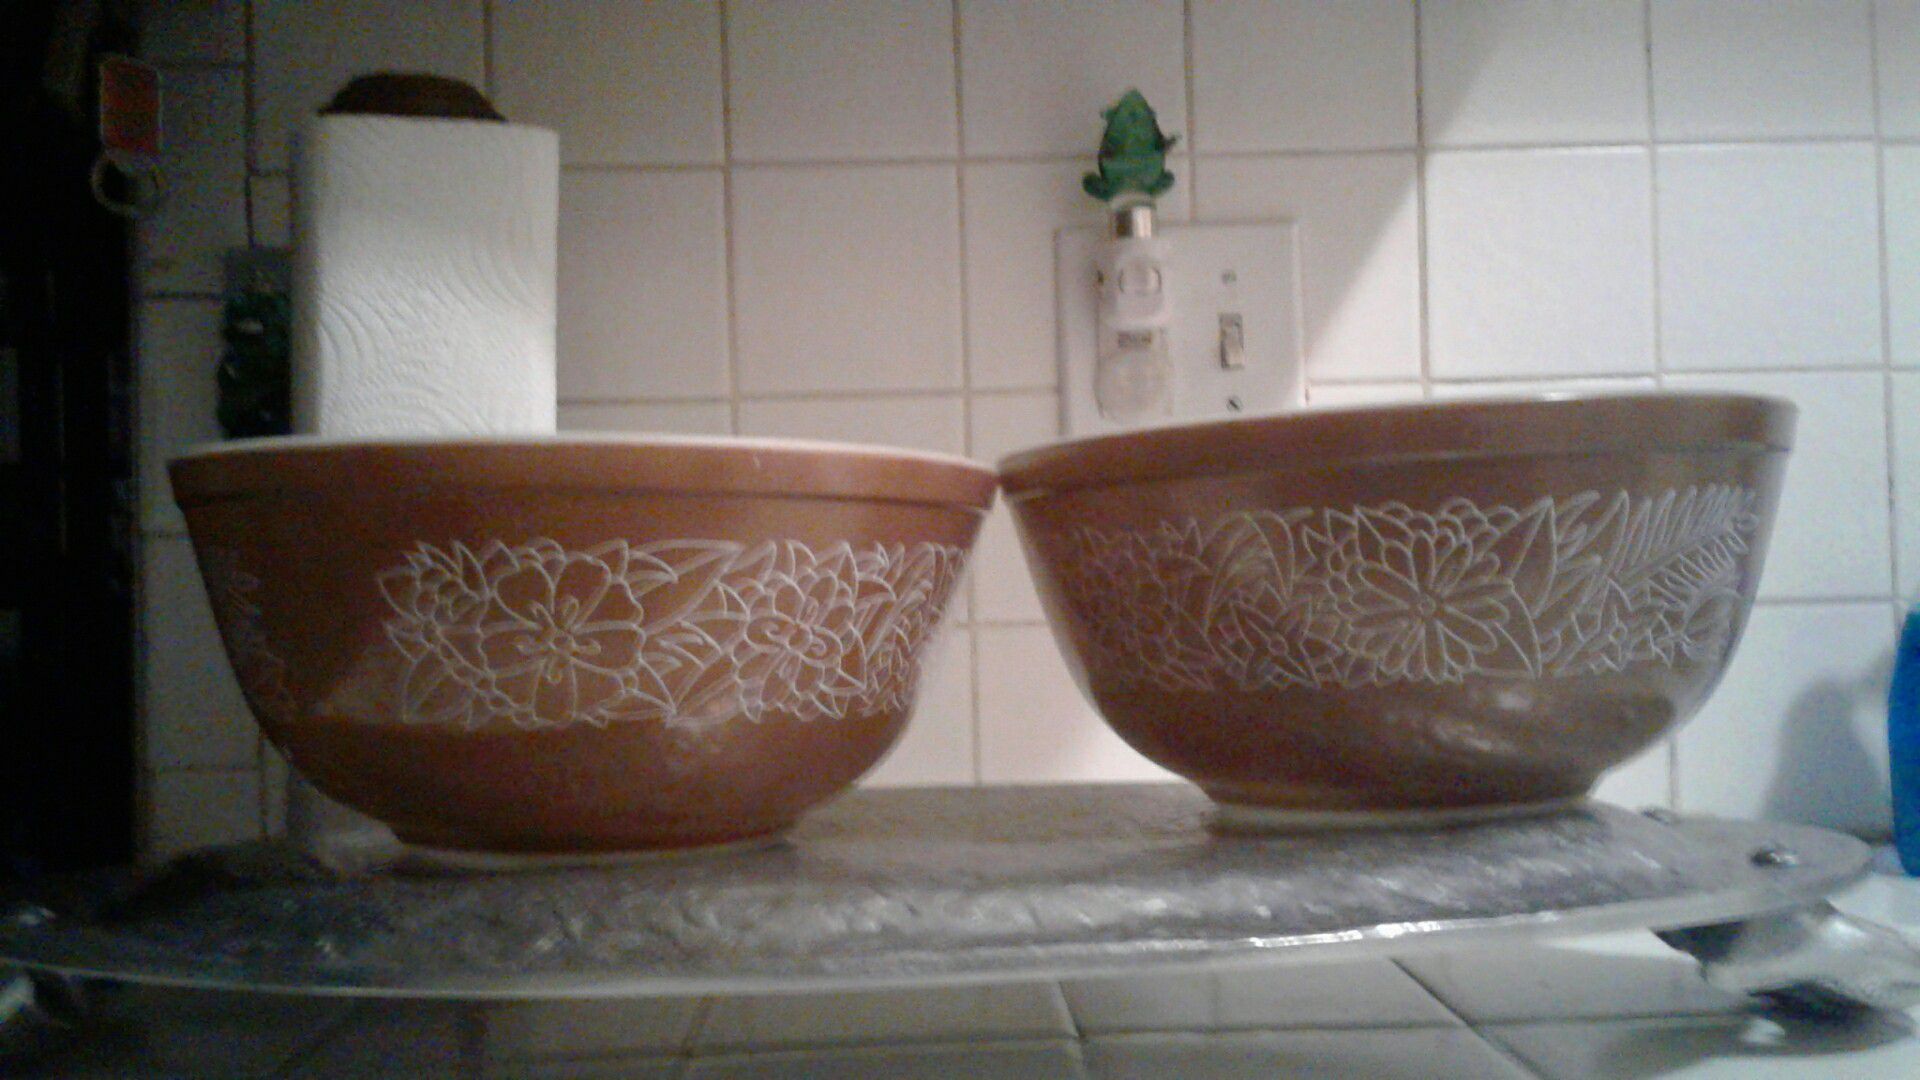 Pyrex mixing bowls $15 for both